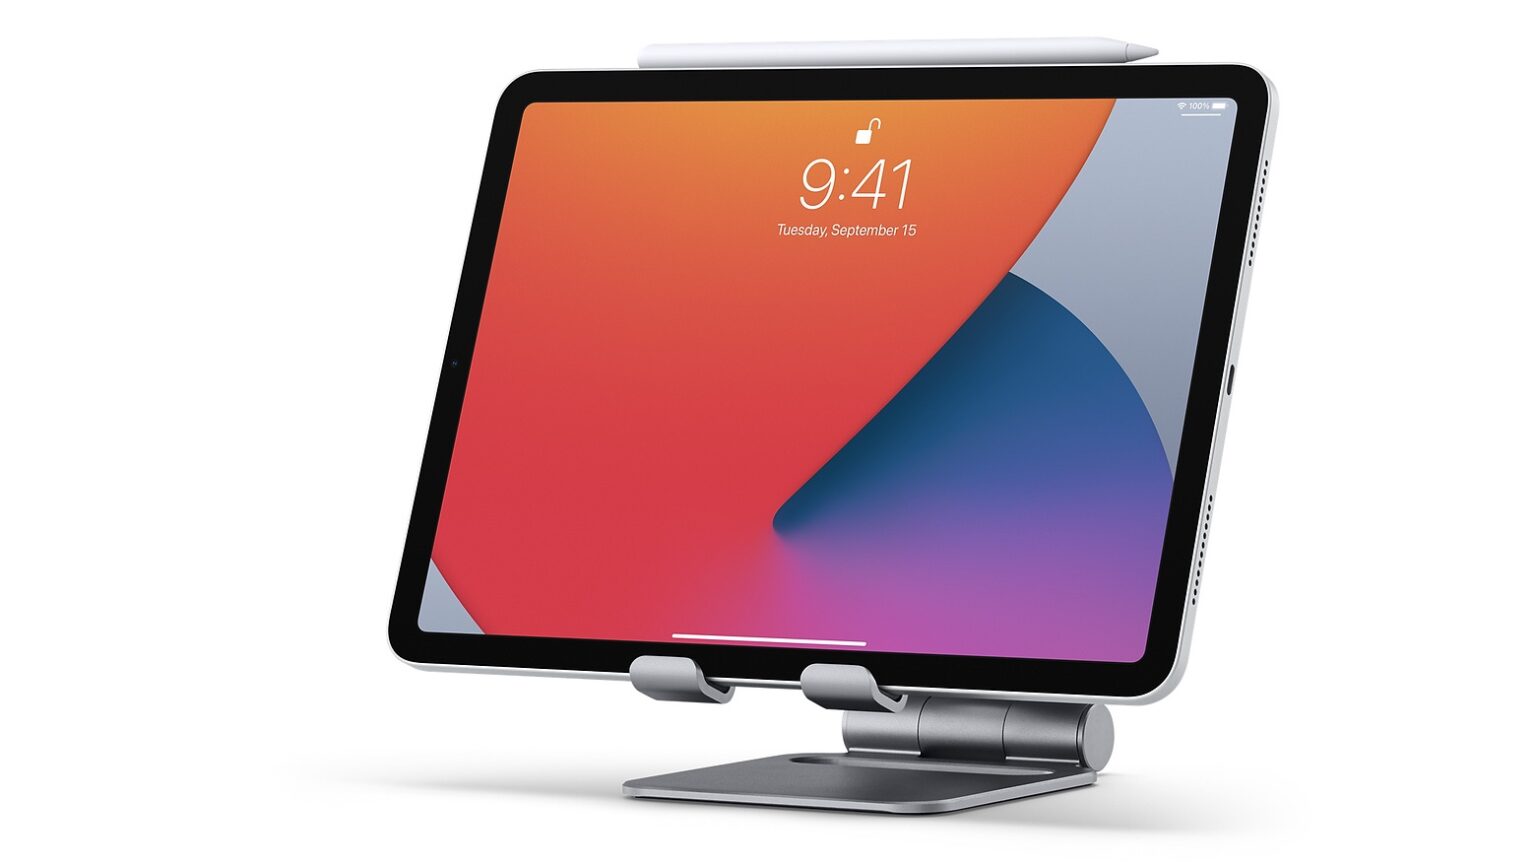 Satechi Aluminum Foldable Stand launched December 9 on the Apple Store.